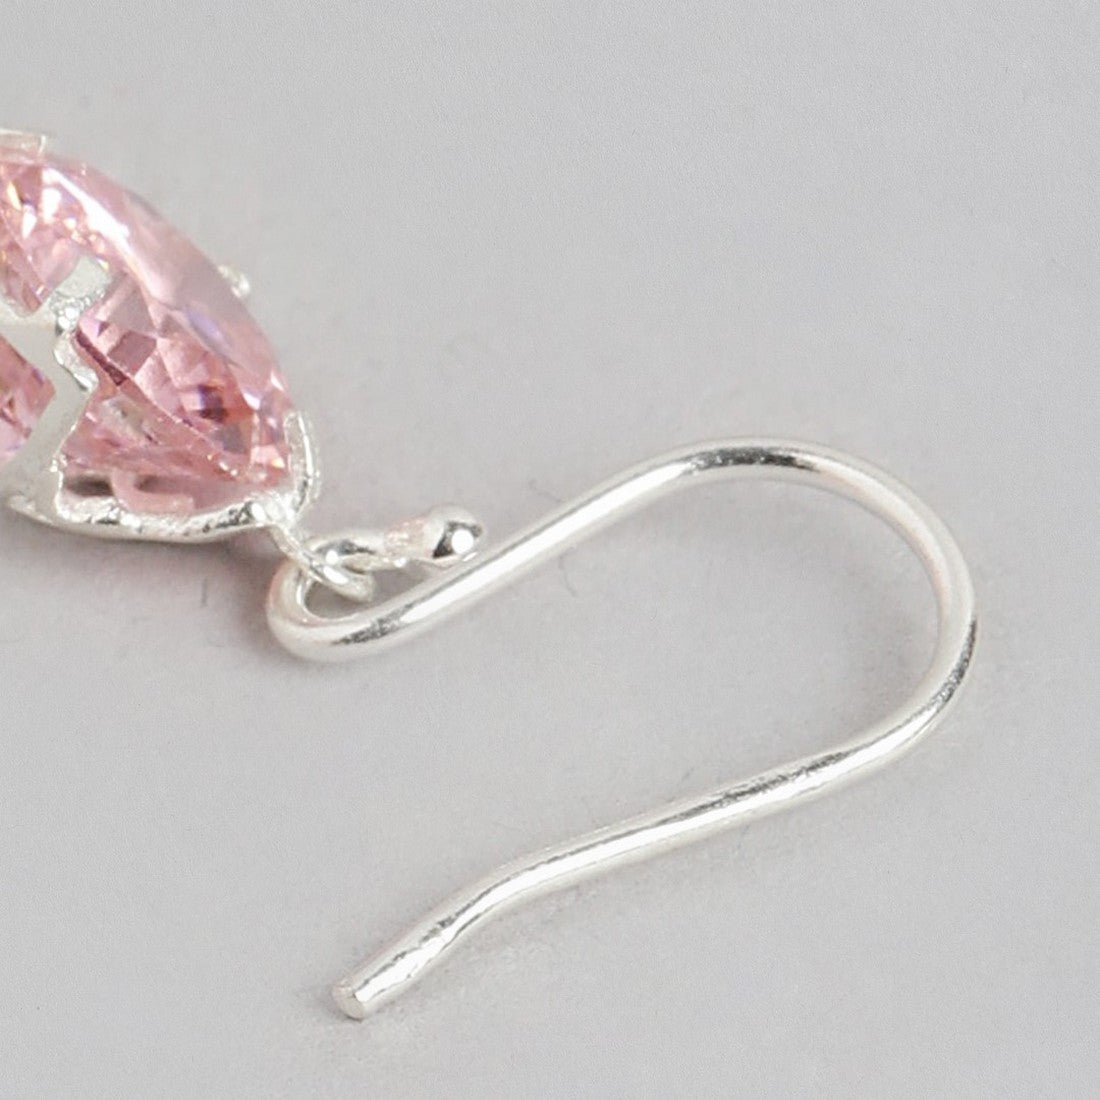 Blushing Petals: Rhodium-Plated Silver Dangle Earrings with Pink Cubic Zirconia